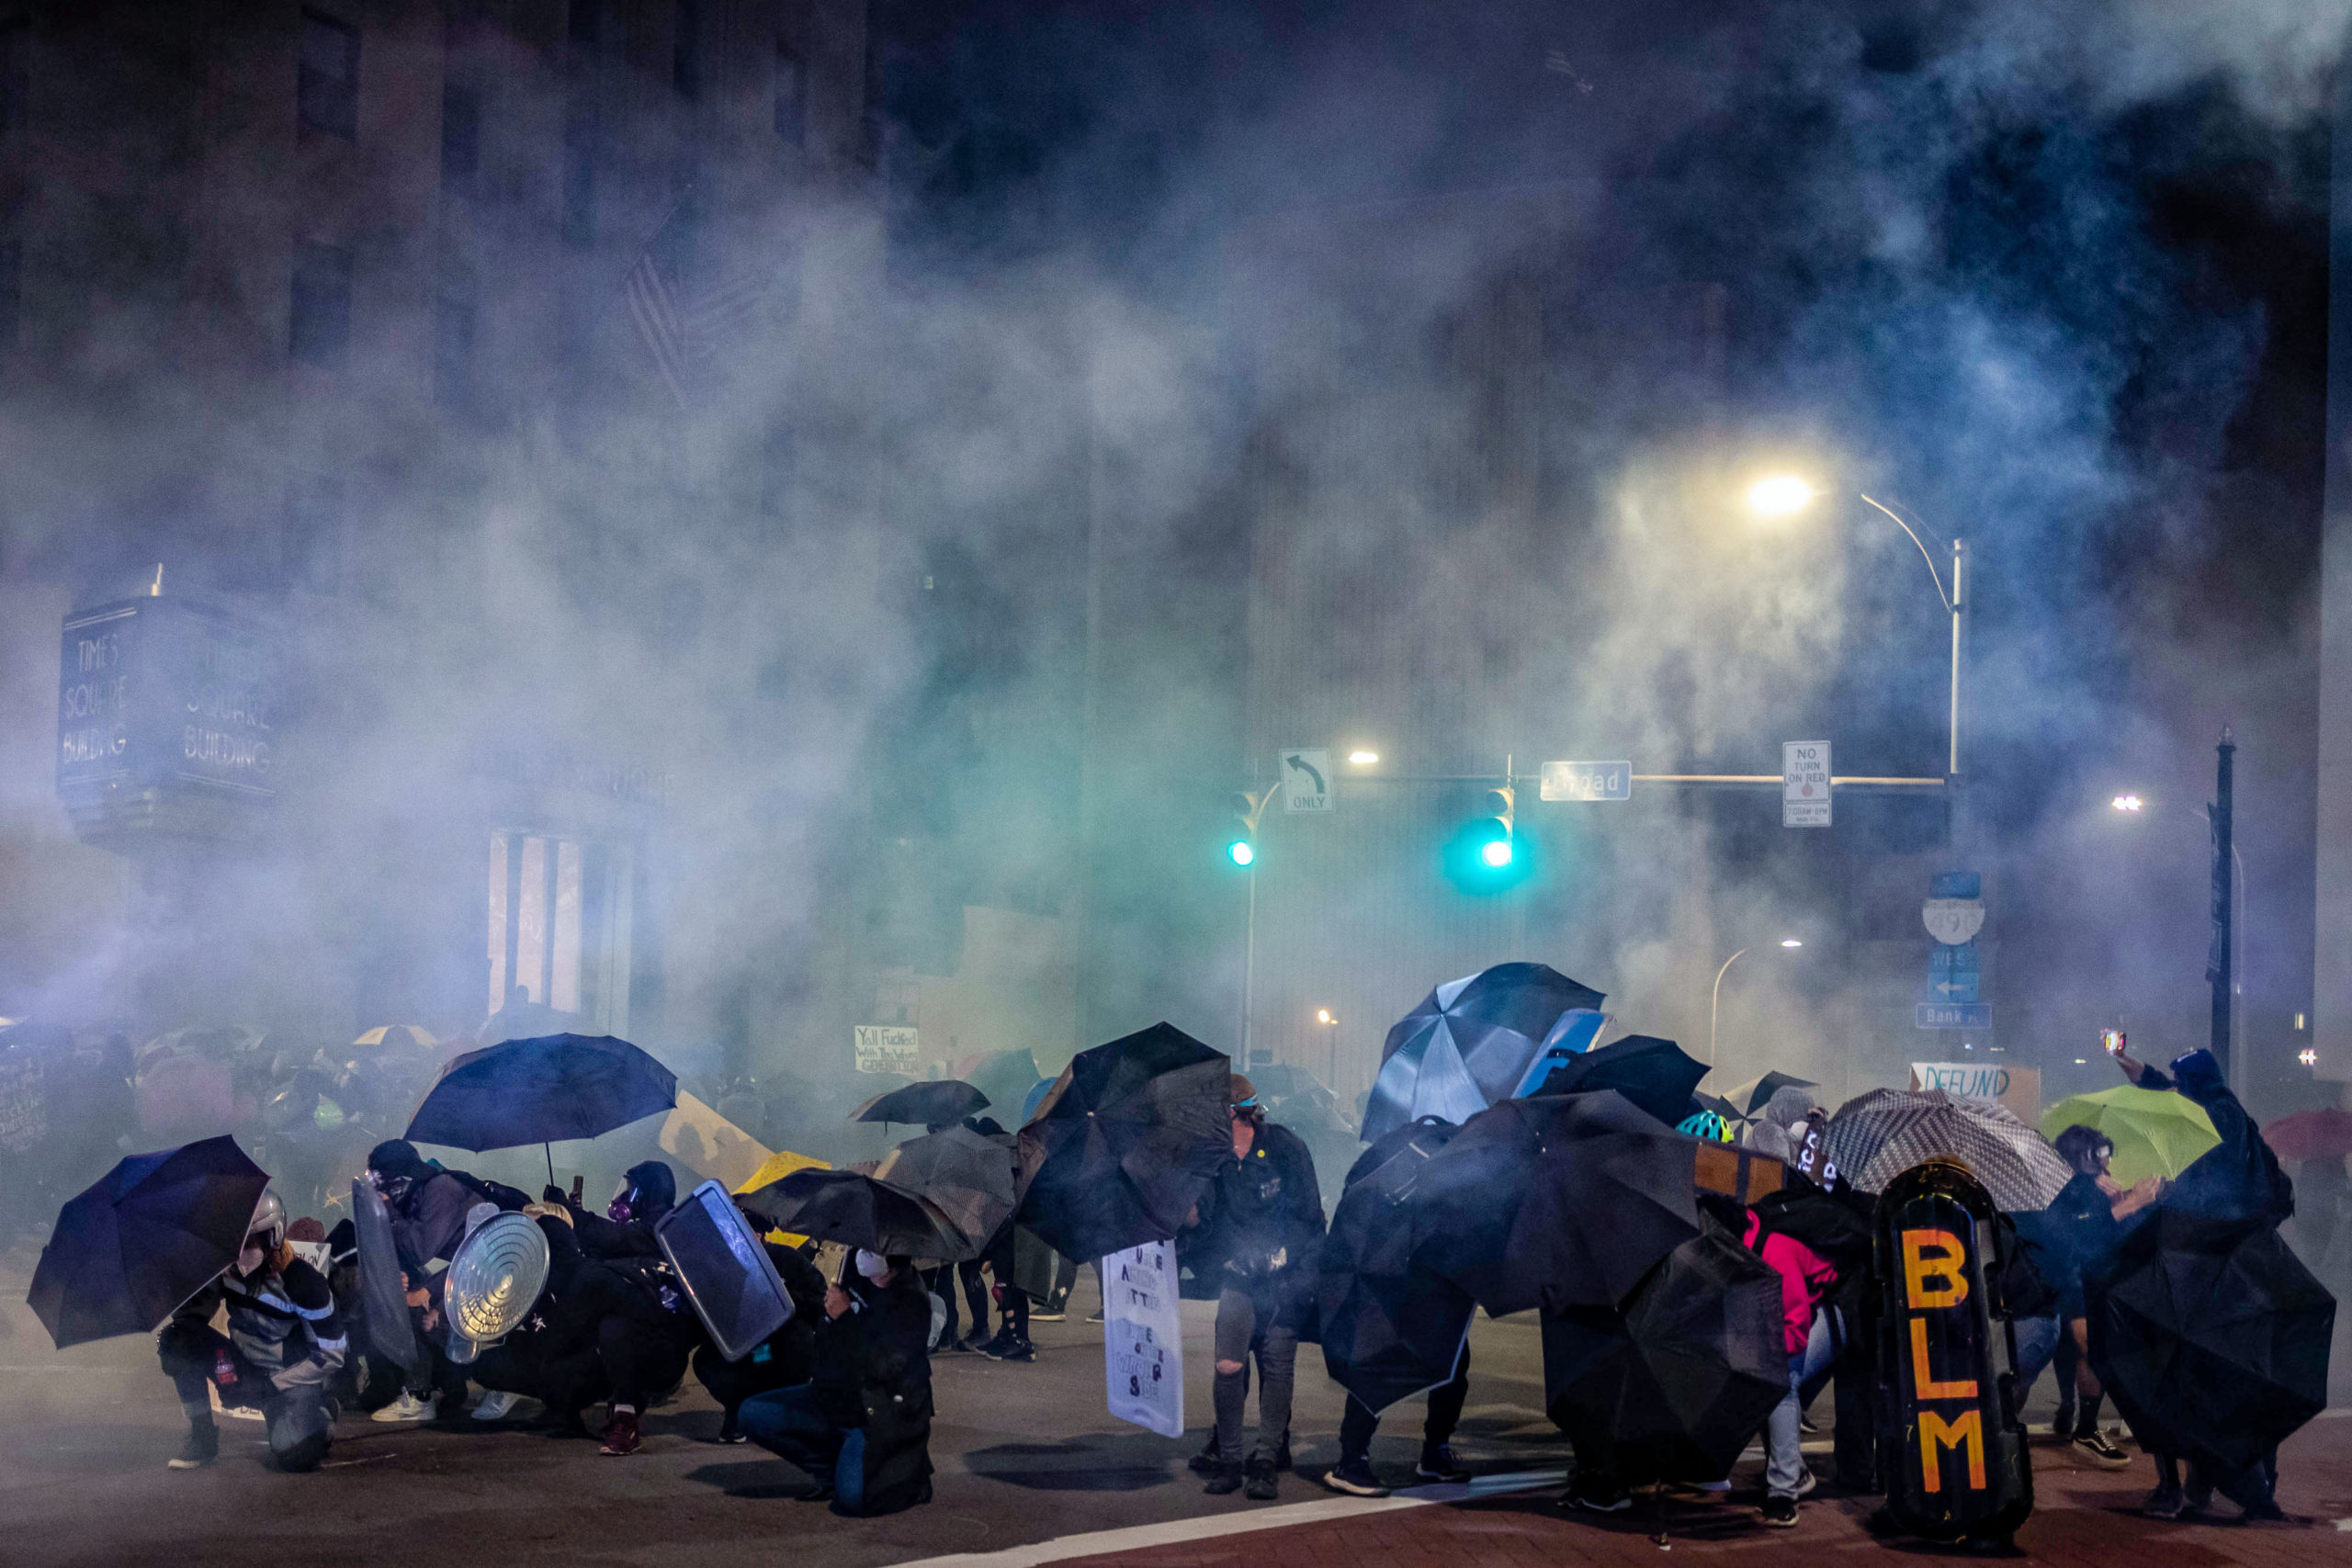 TOPSHOT - Protesters use umbrellas and homemade shields in an attempt to protect themselves from pepper,"less-lethal" munitions and teargas in Rochester, New York, on September 5, 2020, on the fourth night of protest following the release of video showing the death of Daniel Prude. - Prude, a 41-year-old African American who had mental health issues, died of asphyxiation after police arrested him on March 23, 2020, in Rochester. (Photo by Maranie R. STAAB / AFP) (Photo by MARANIE R. STAAB/AFP via Getty Images)